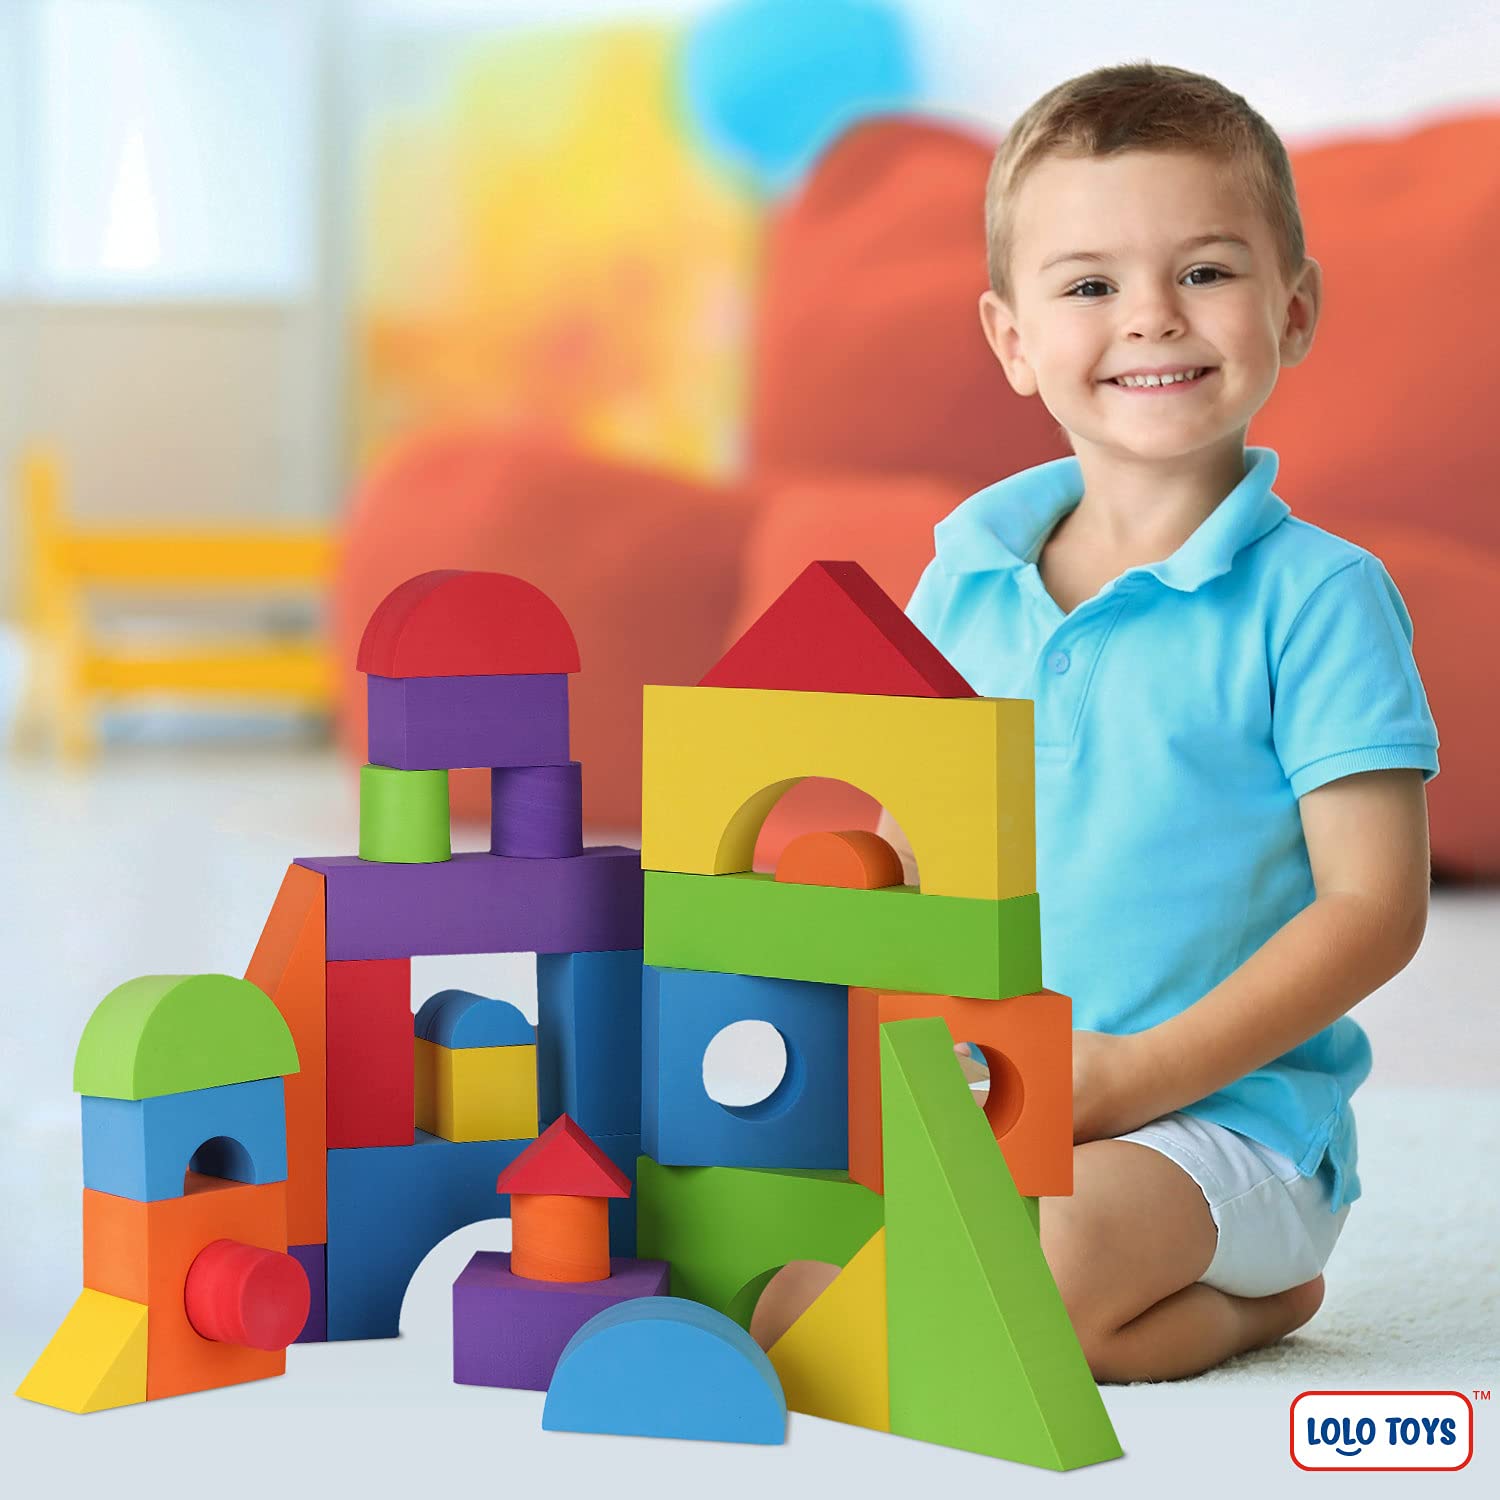 Large Building Foam Blocks for Toddlers – Giant Jumbo Big Building Blocks – Variety Shapes and Colors – Waterproof, Washable, Stackable, Non-Toxic Construction Daycare Preschool Toys